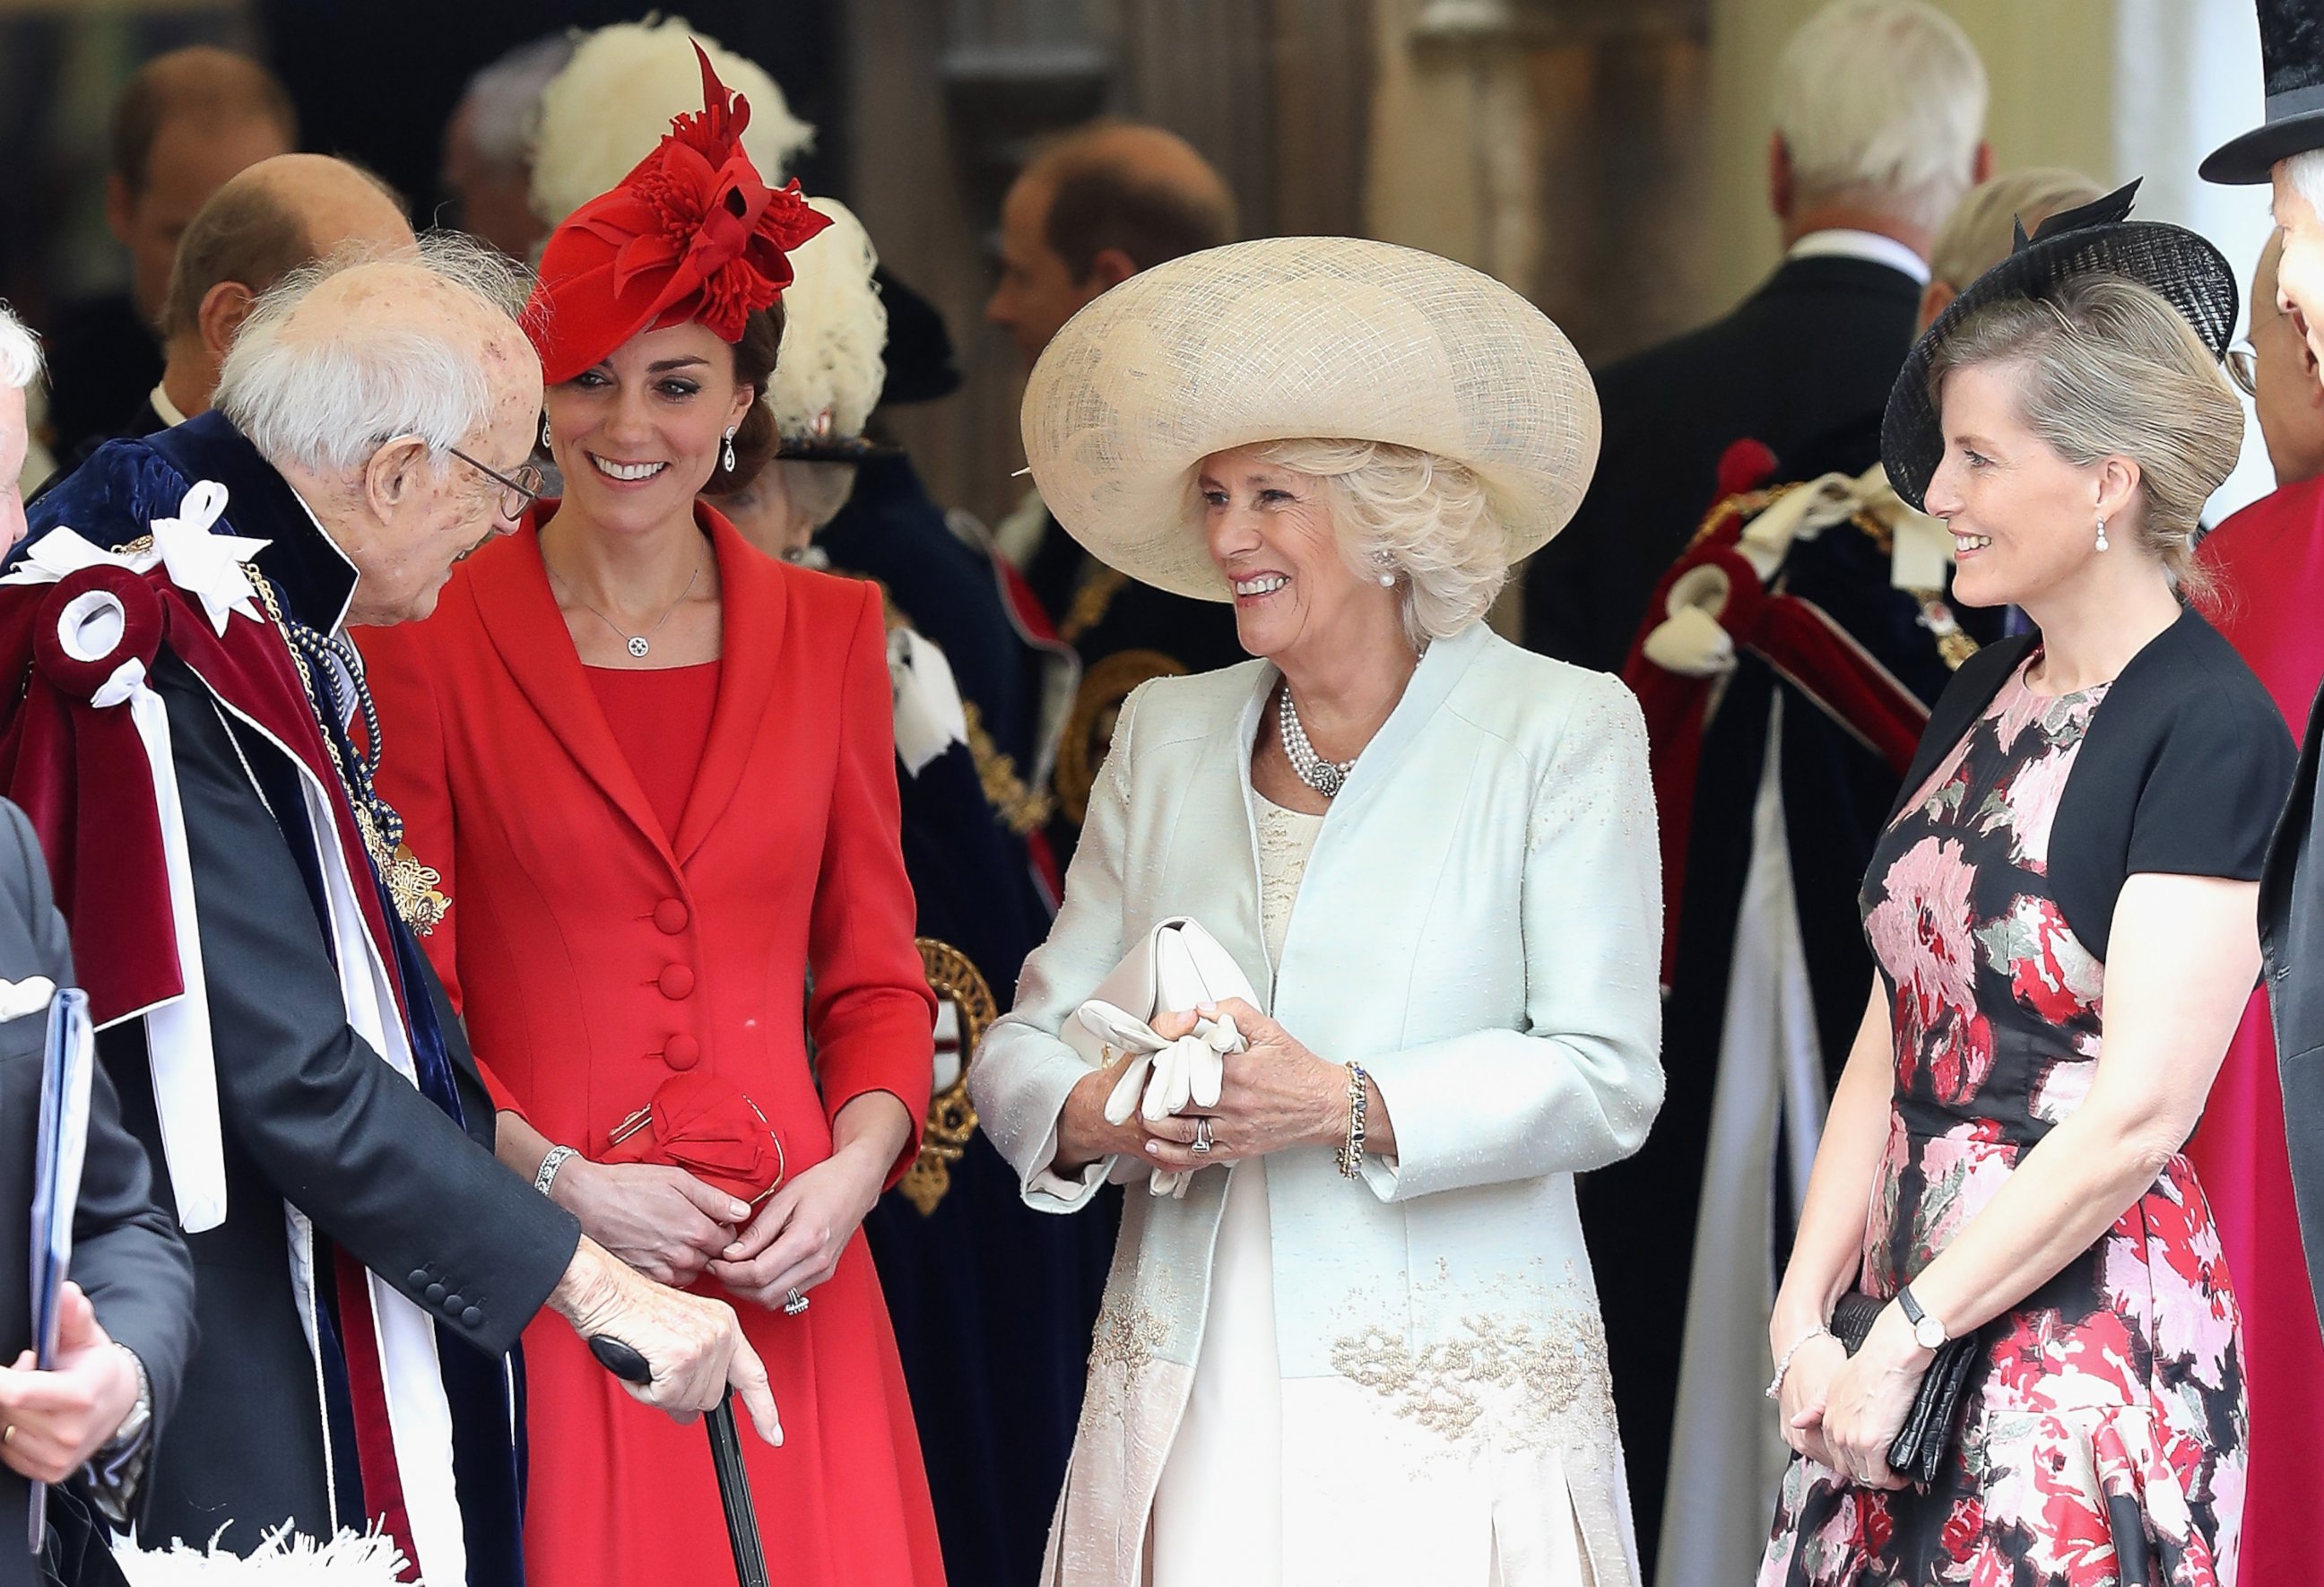 PHOTO:Catherine, Duchess of Cambridge, Camilla, Duchess of Cornwall and Sophie, Countess of Wessex chat with guests after the Order of the Garter Service at Windsor Castle, June 13, 2016, in Windsor, England.  